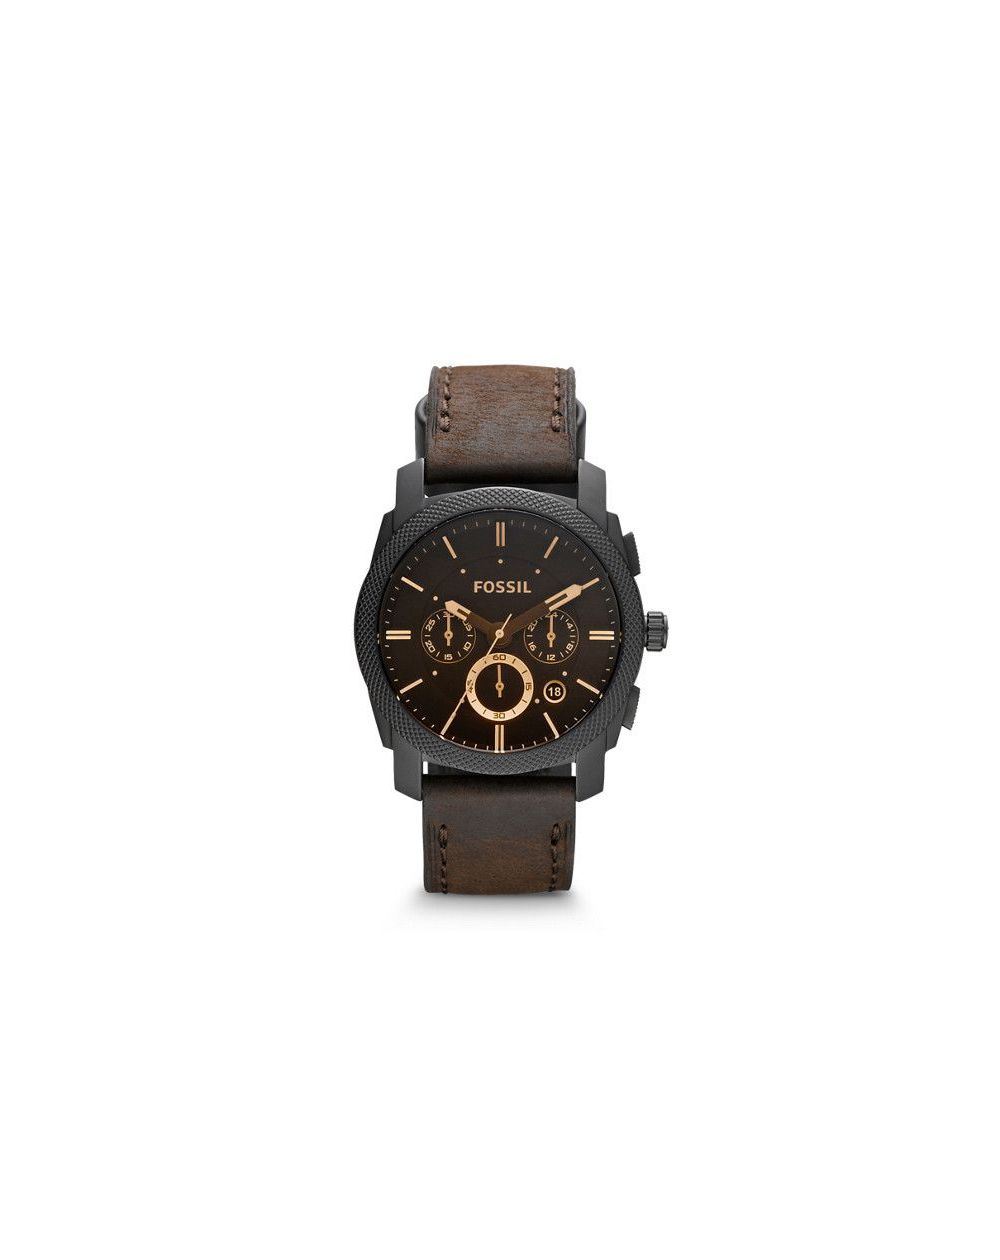 Fossil - Watch Machine leather chronograph - Brown